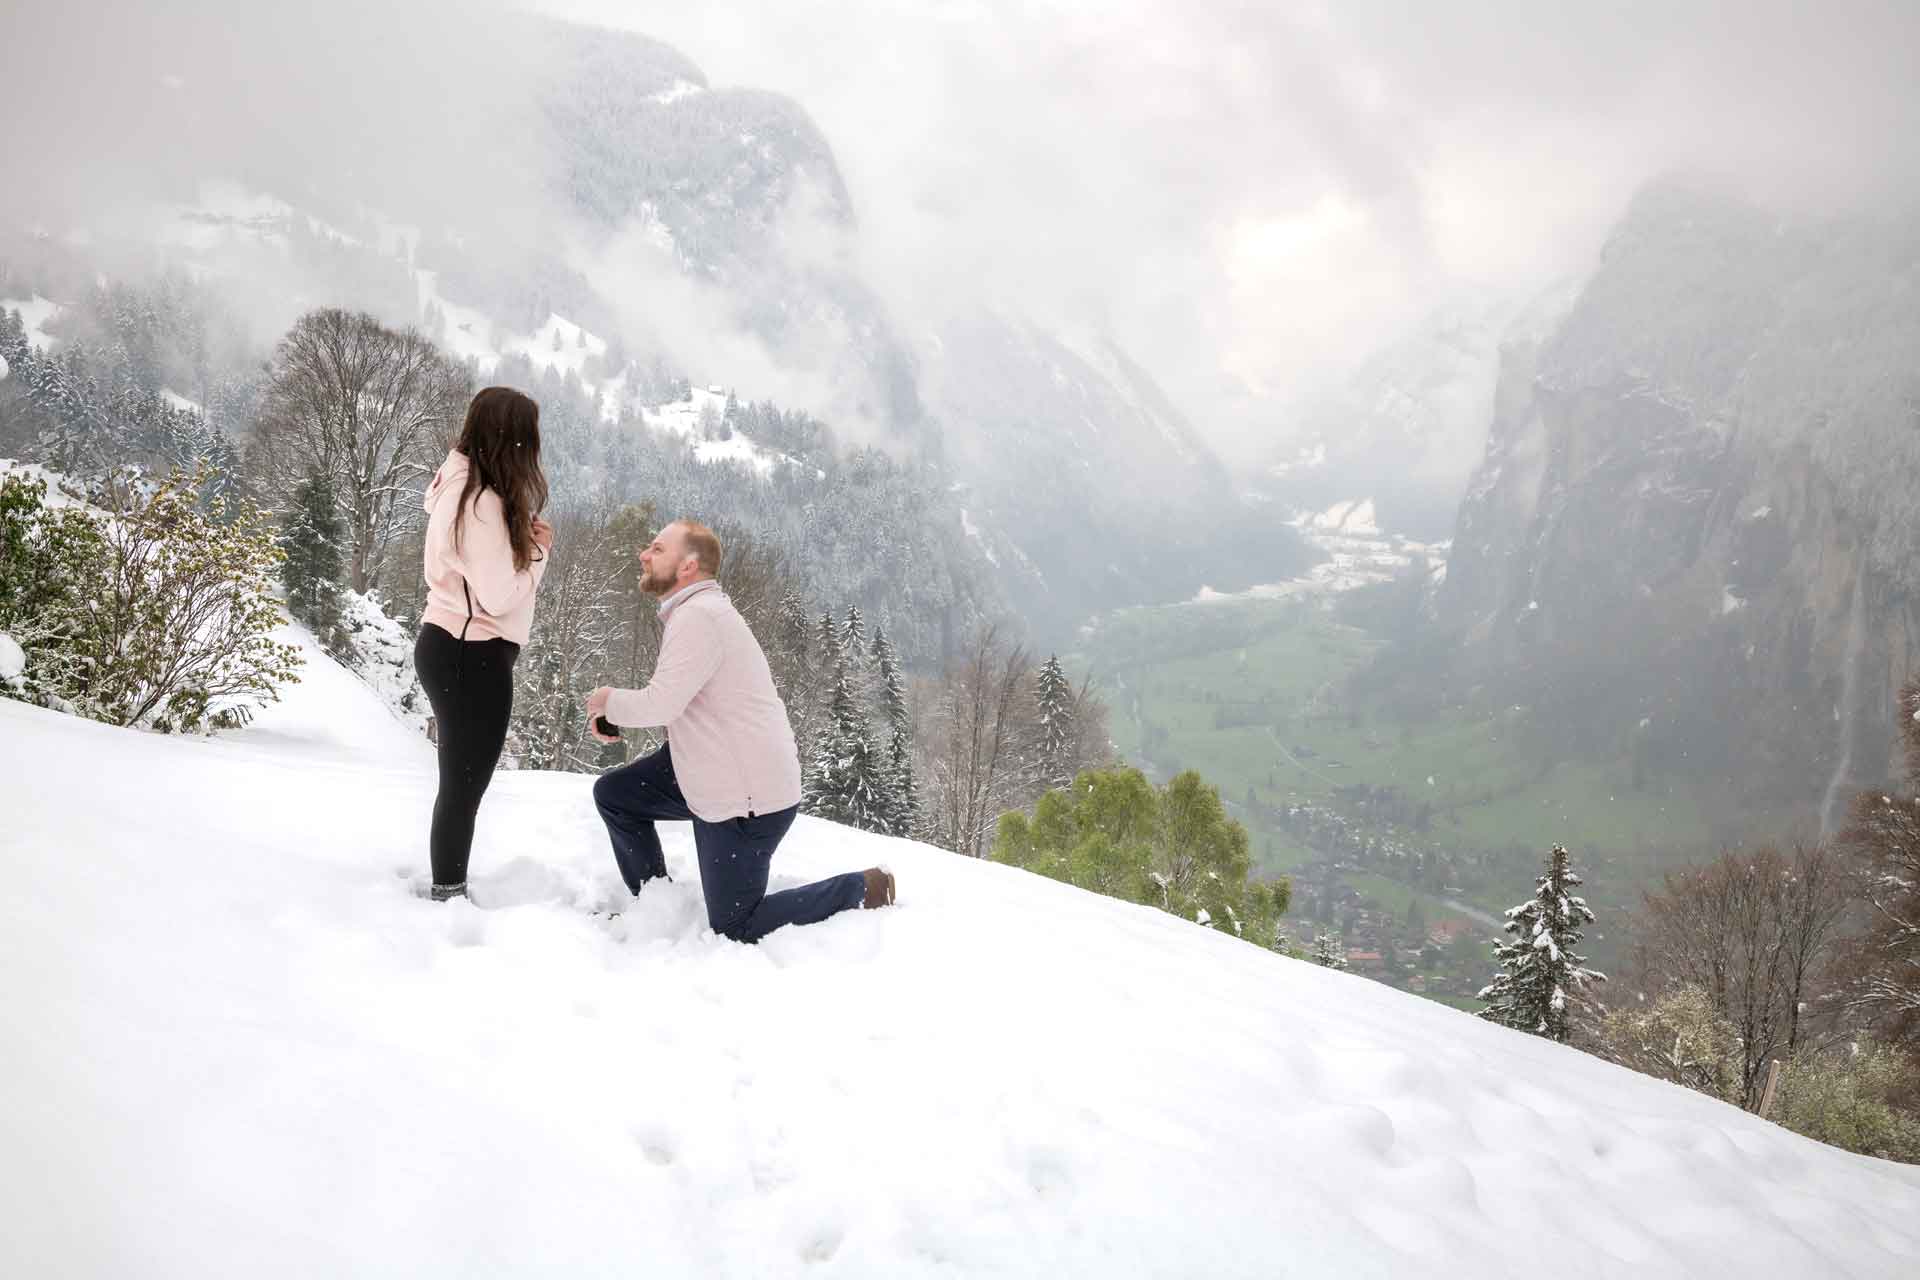 Marriage proposal in the snow